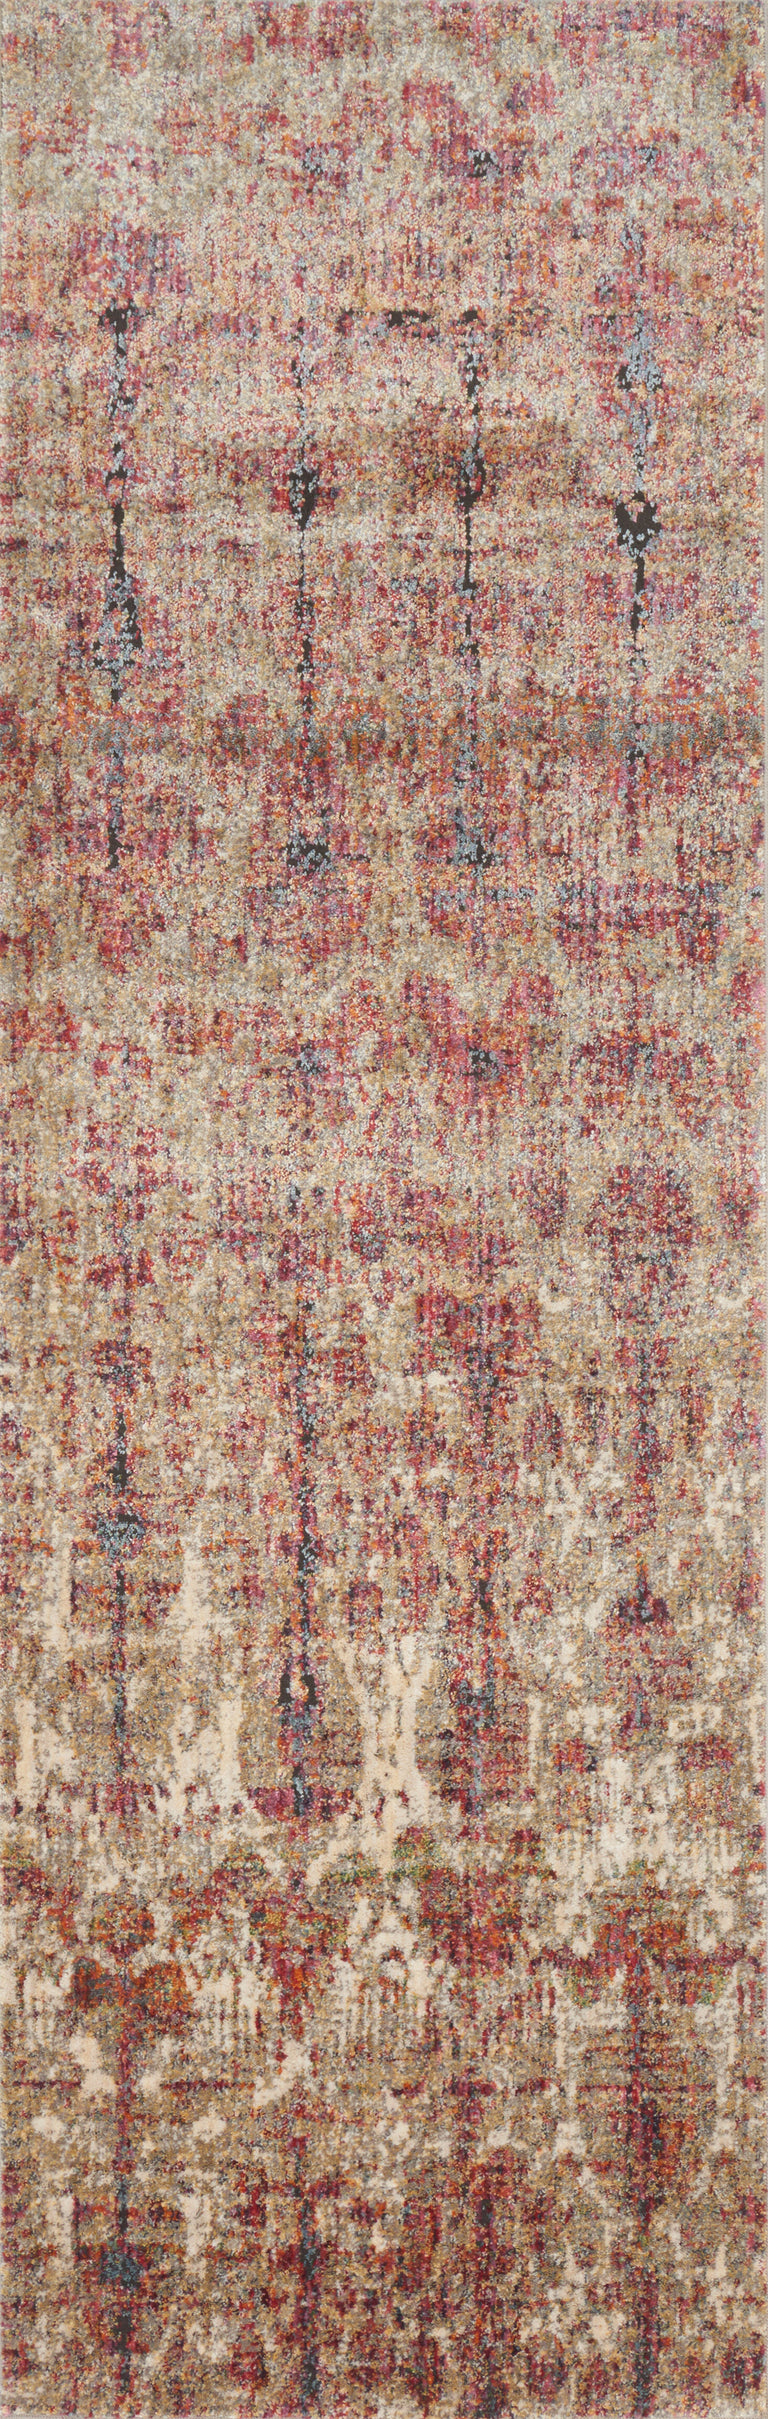 Loloi Rugs Javari Collection Rug in Drizzle, Berry - 12'0" x 15'0"